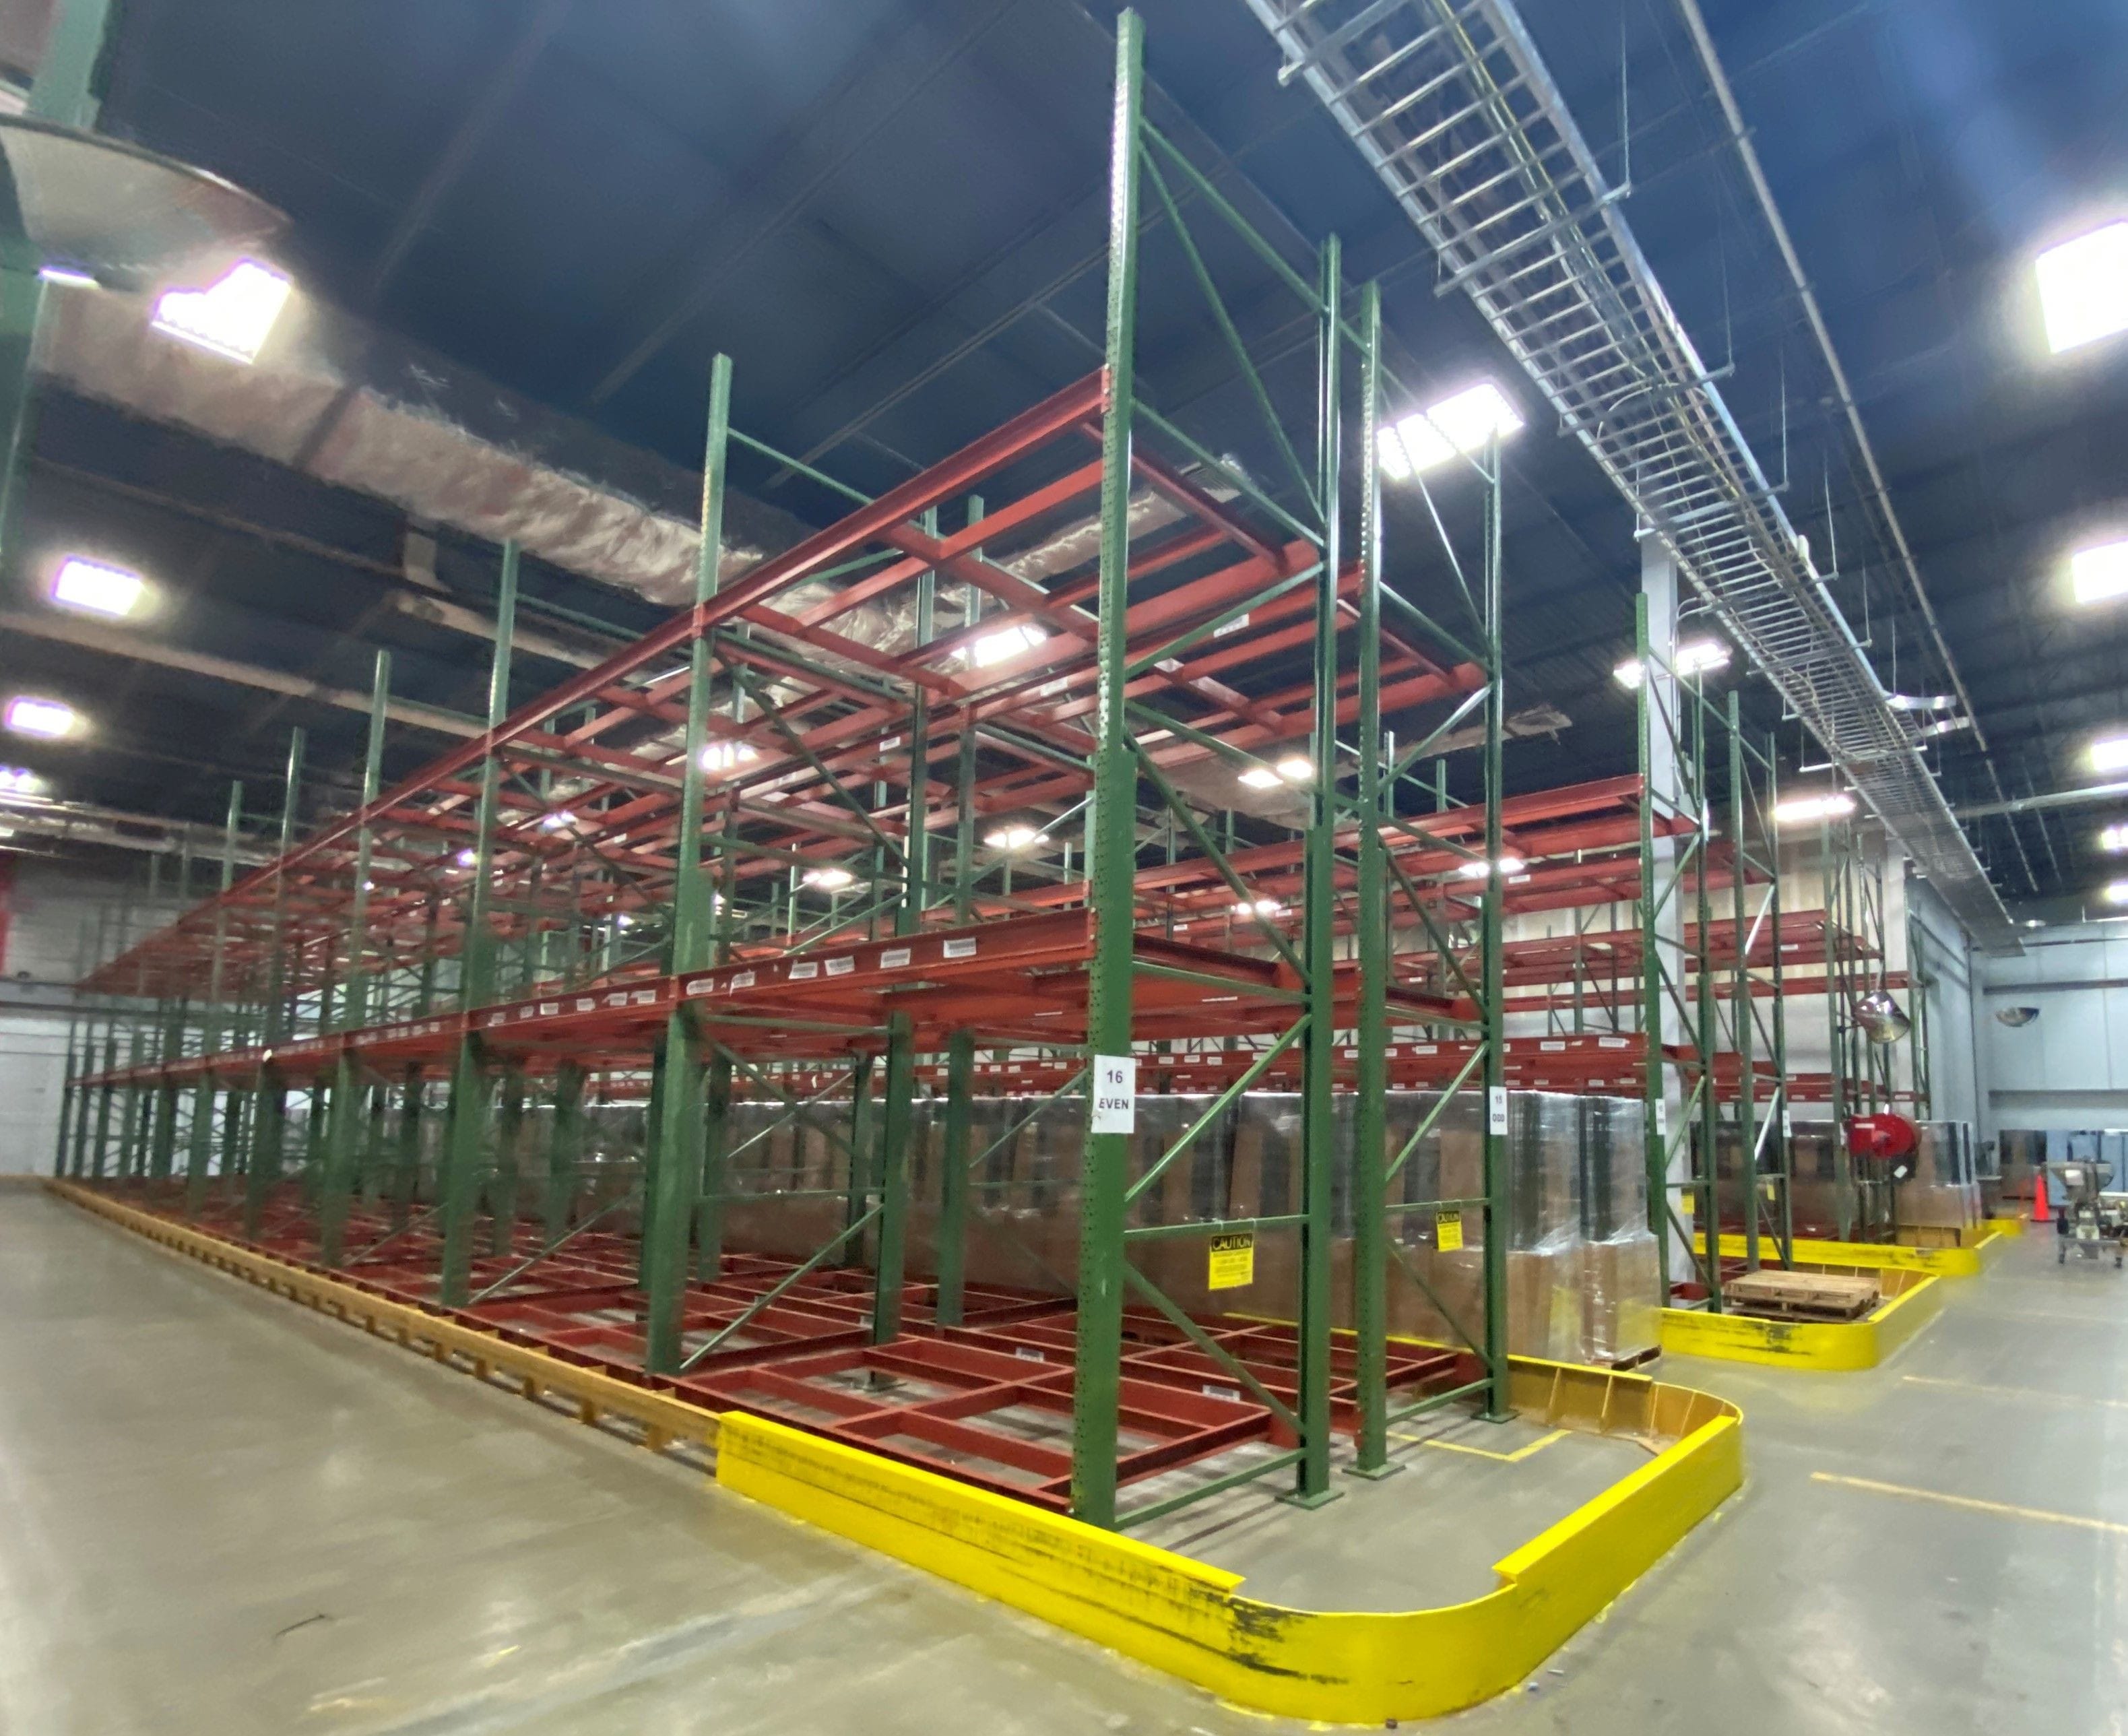 HEAVY DUTY WAREHOUSE PALLET RACKING

INCLUDES: 
UPRIGHTS
SHELVES
BEDS
 SHELF SUPPORTS

****MULTIPLE CONFIGURATIONS AVAILABLE.